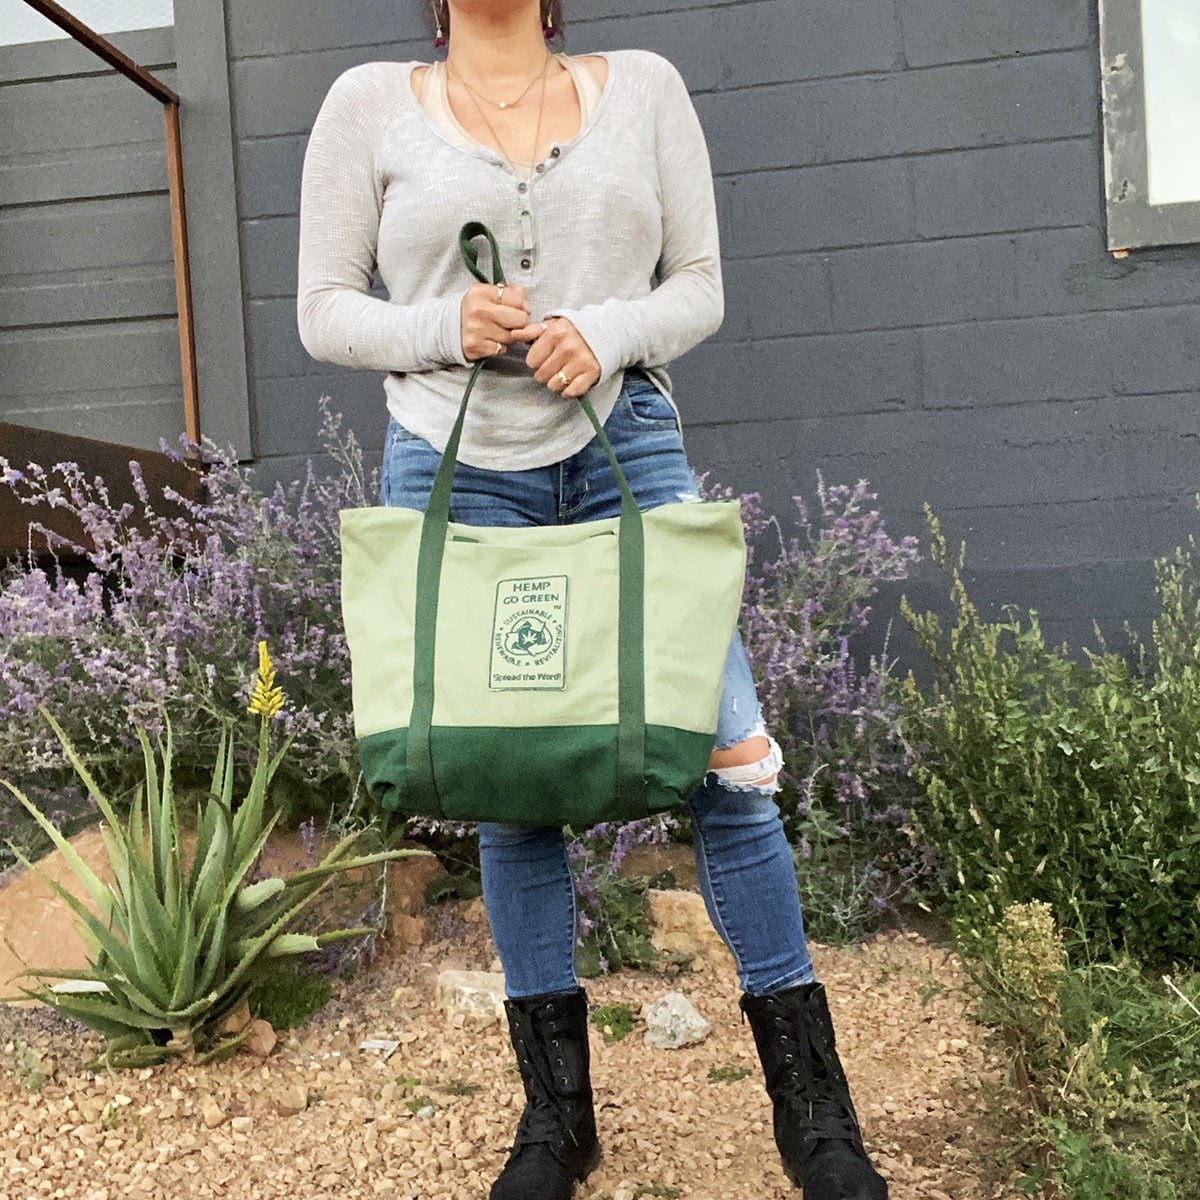 L.L. Bean Boat and Tote Review 2020